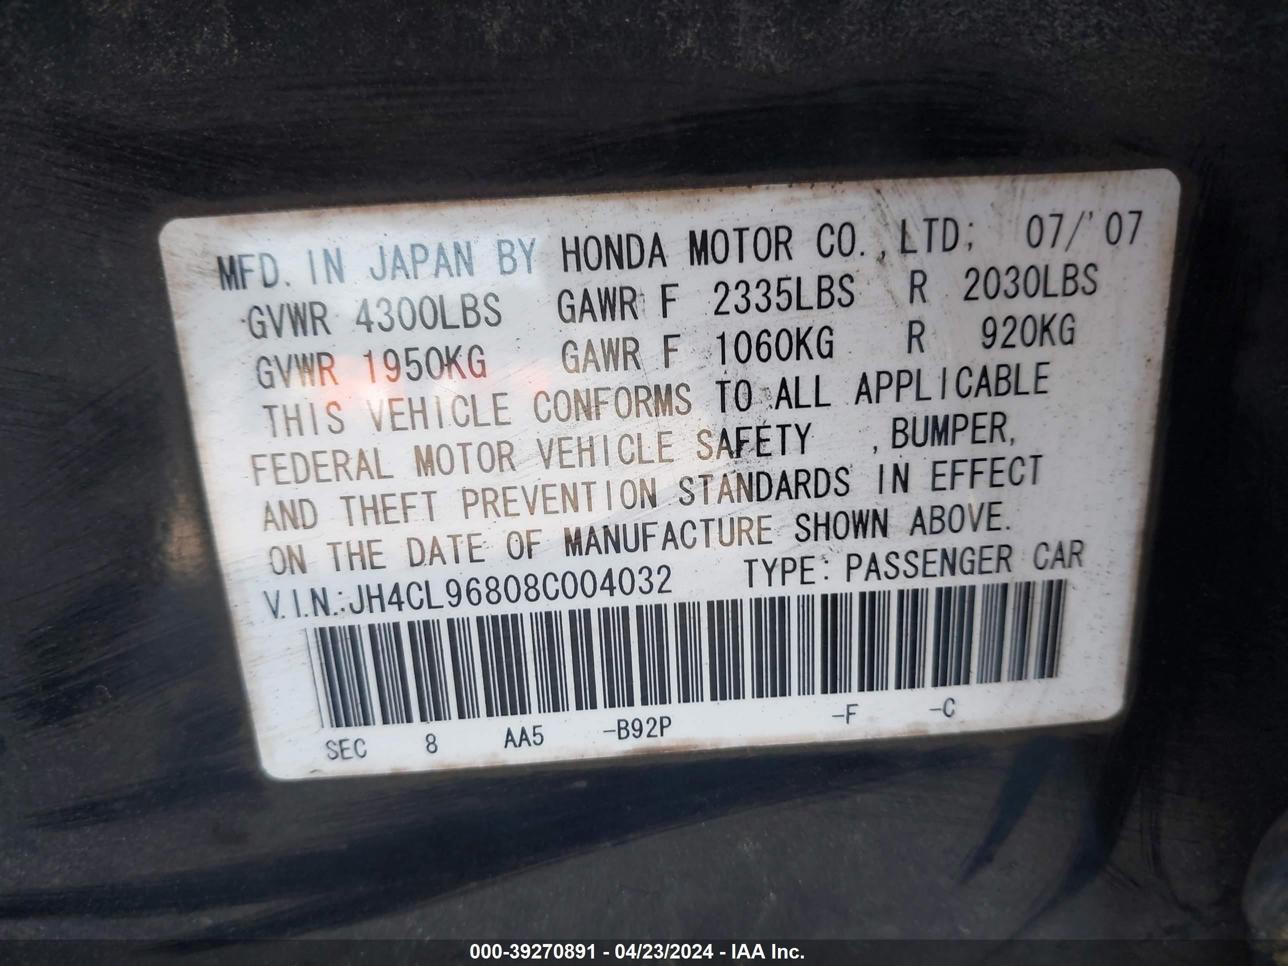 JH4CL96808C004032  - ACURA TSX  2008 IMG - 8